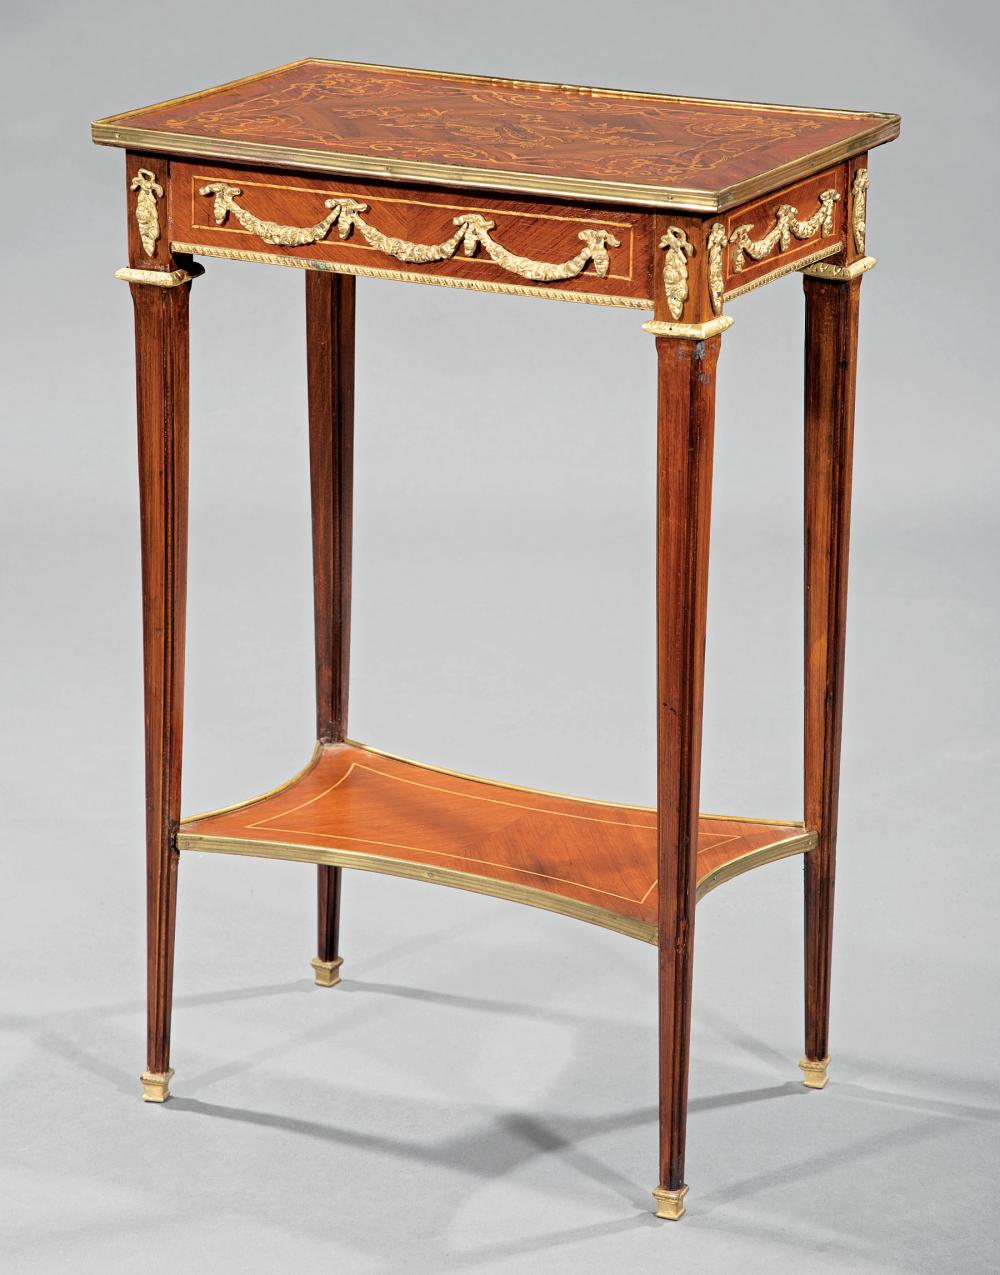 MARQUETRY AND GILT BRONZE-MOUNTED